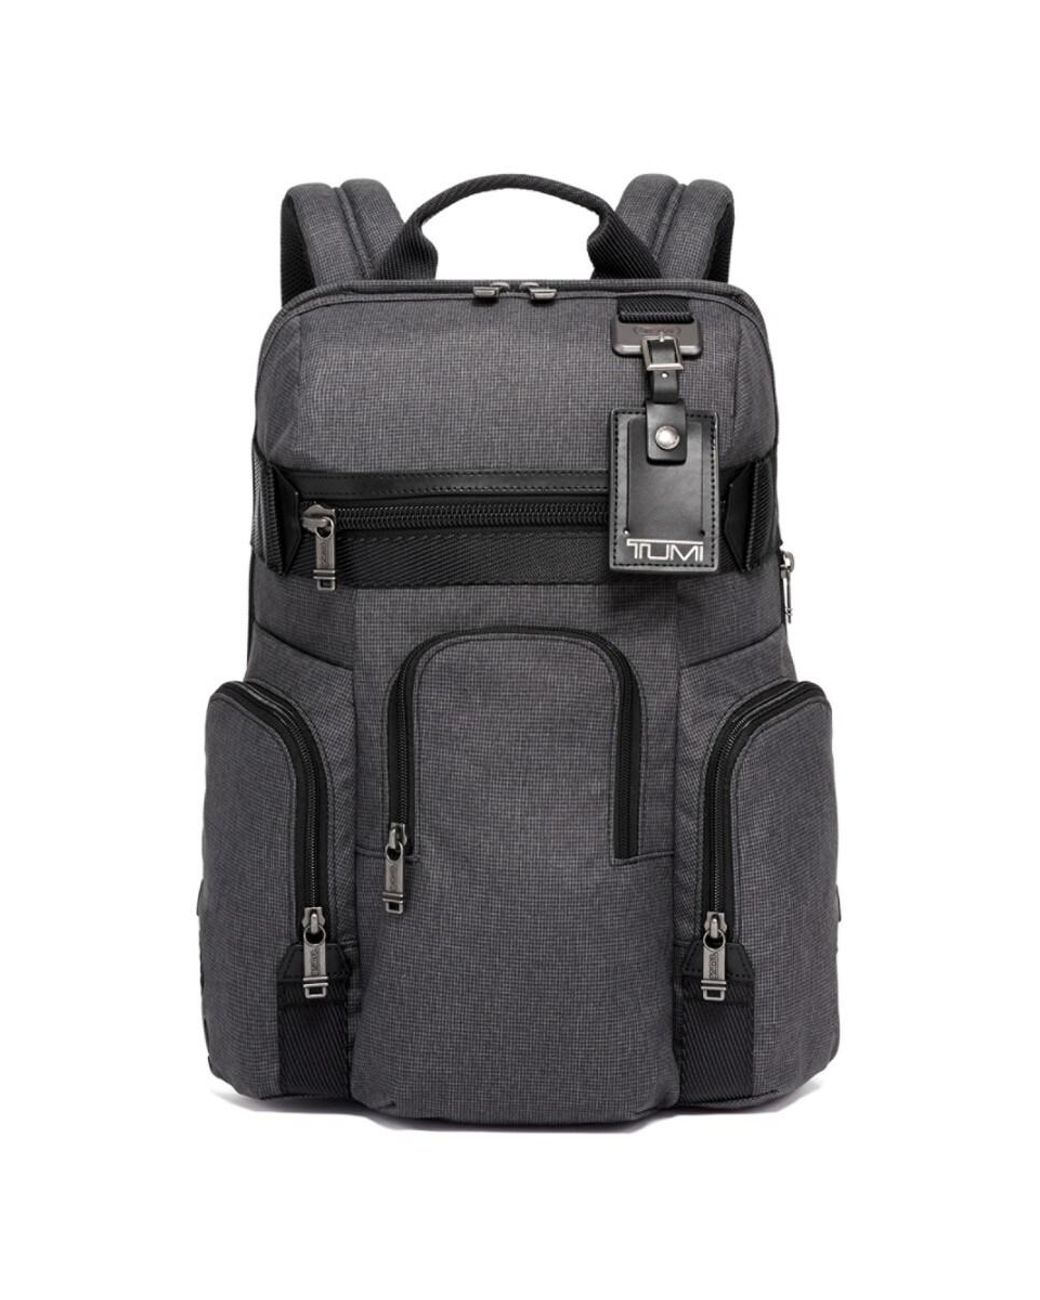 Tumi Nickerson Gridlock Travel Backpack - Heather Grey in Gray | Lyst